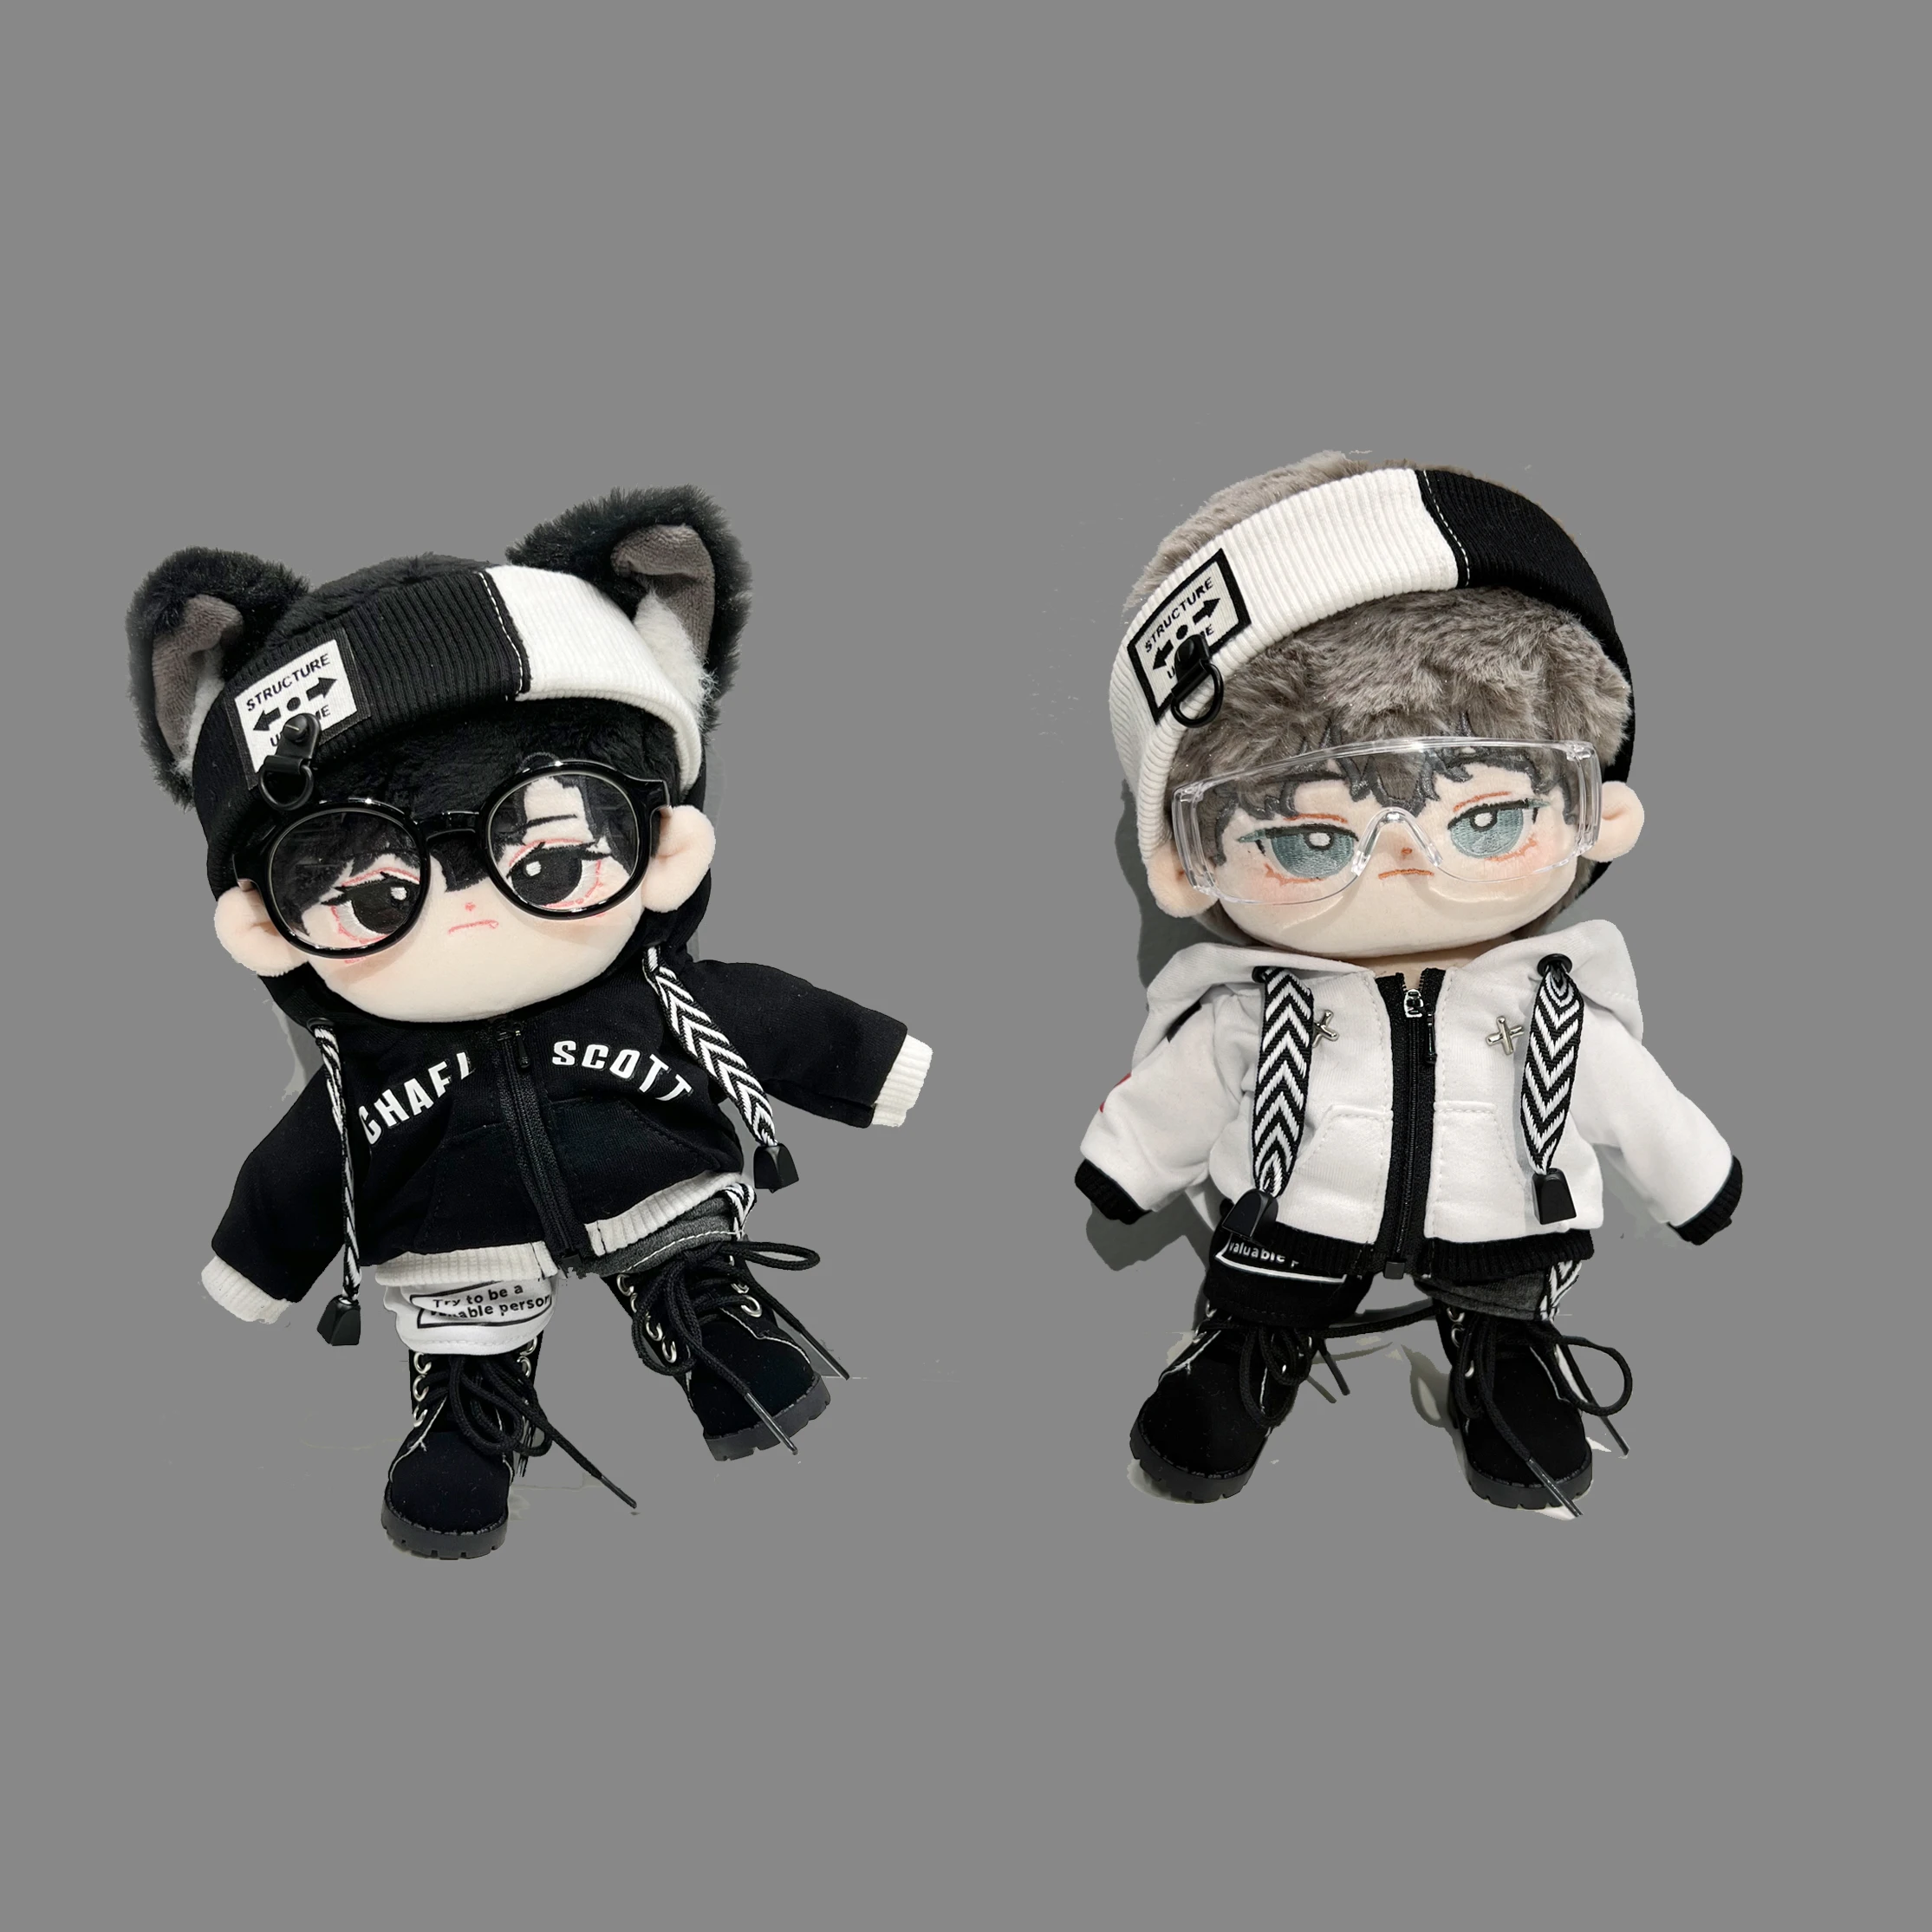 in Stock 15/20cm Plush Doll's Clothes 5PC Cool Suit Black Sweater Jacket Shorts Hairband Glasses Boots Dolls Accessories Outfit